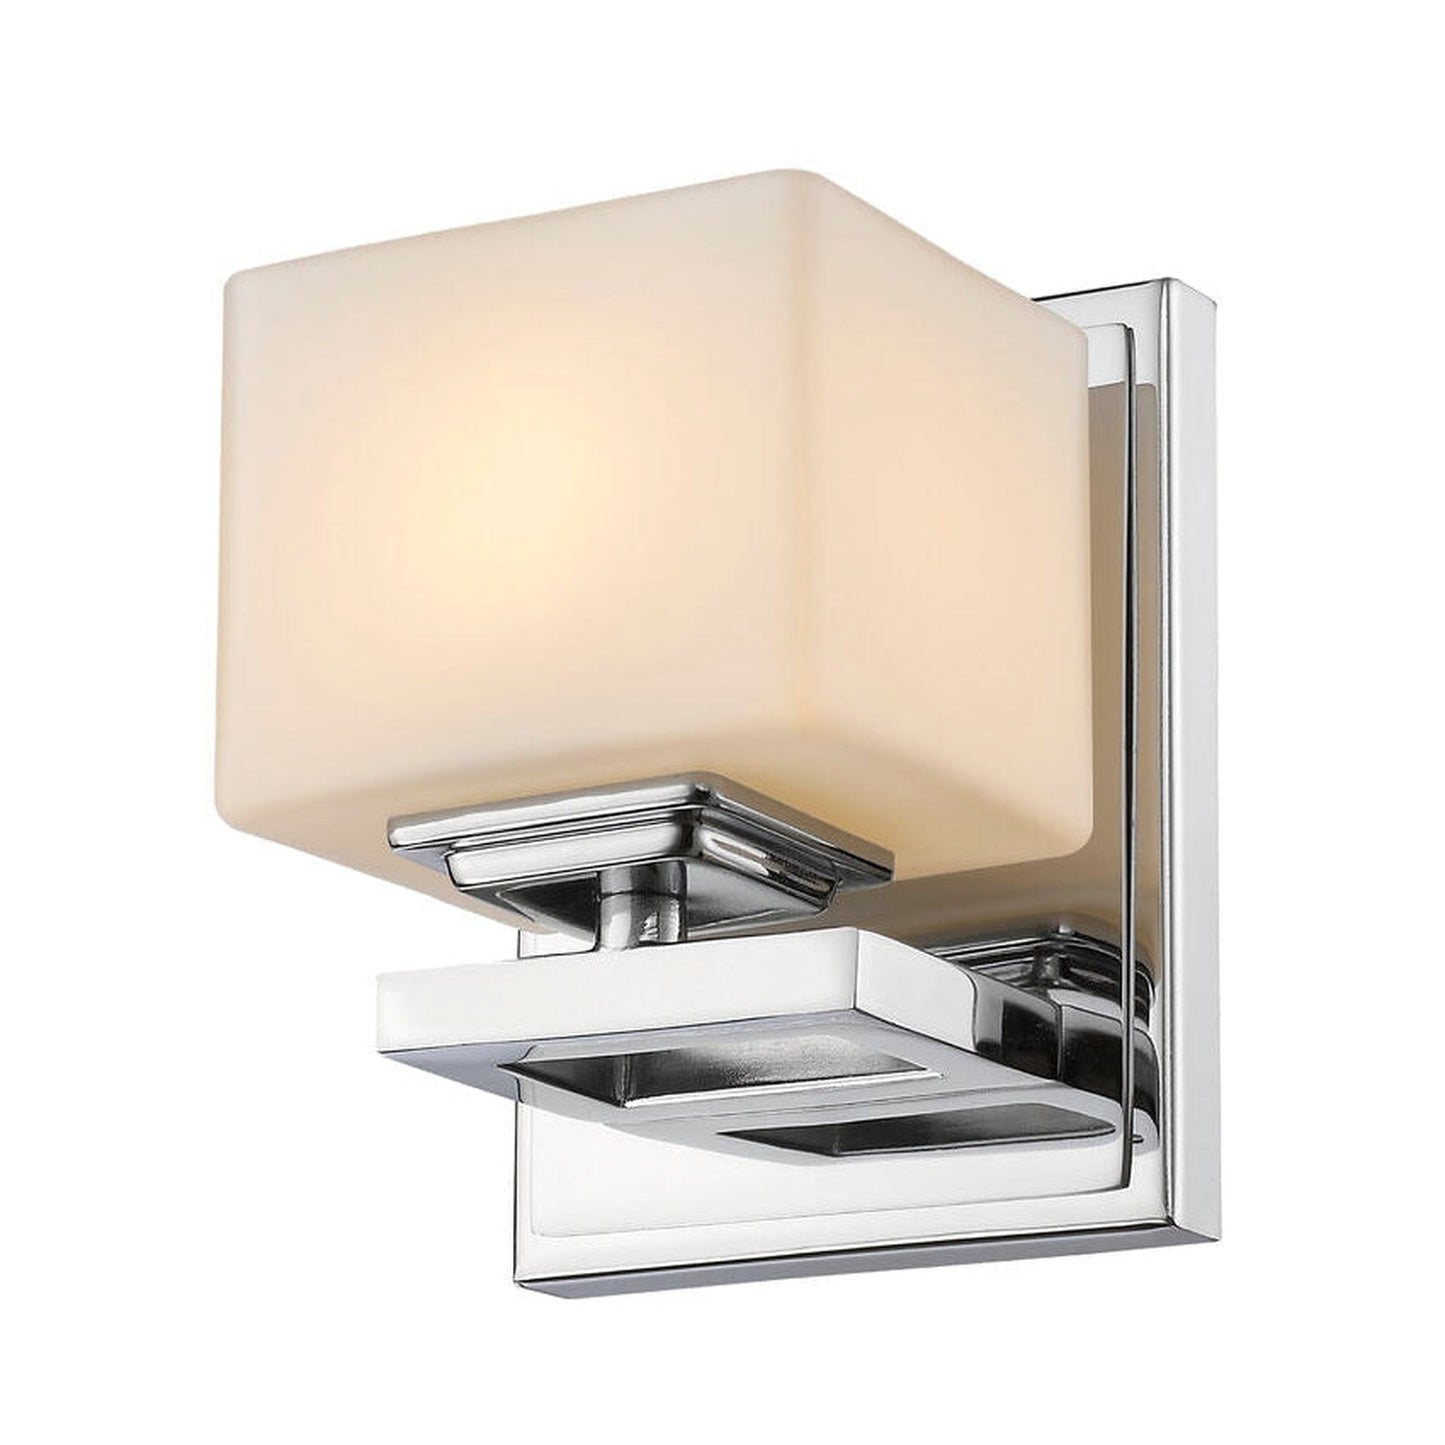 Z-Lite Cuvier 5" 1-Light LED Chrome Wall Sconce With Matte Opal Glass Shade